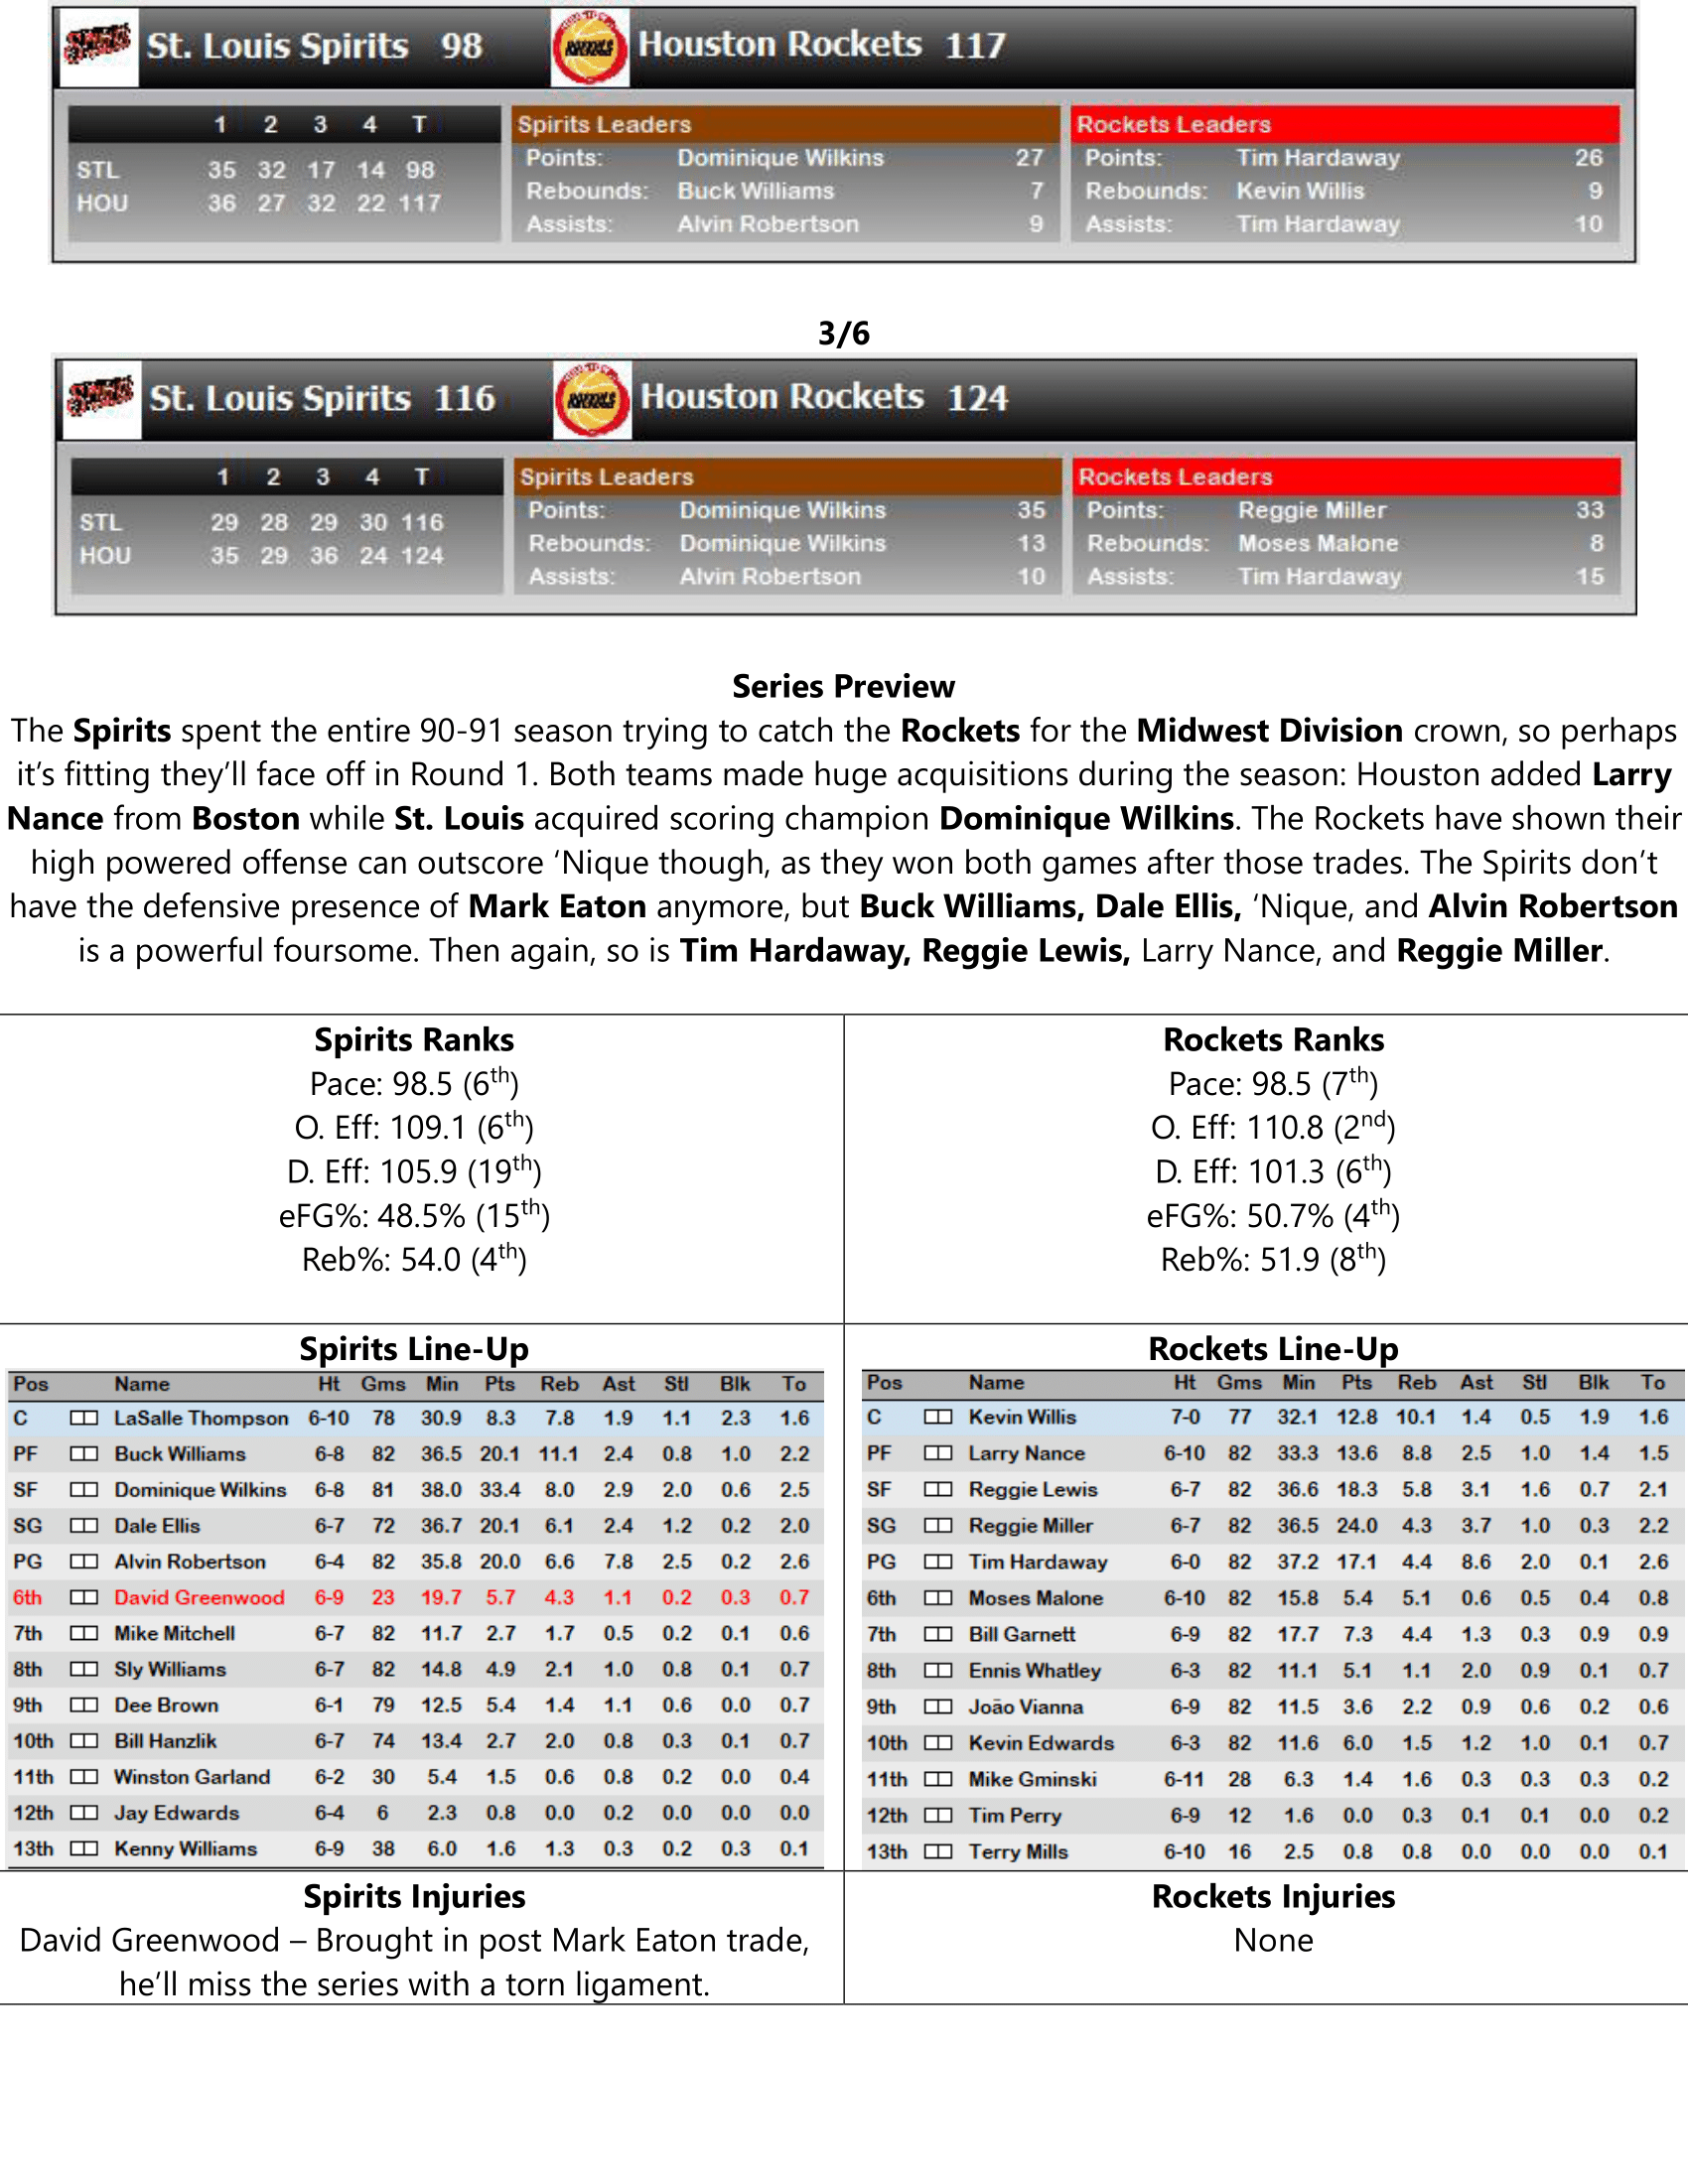 90-91-Part-4-Playoff-Preview-Round-1-05.png